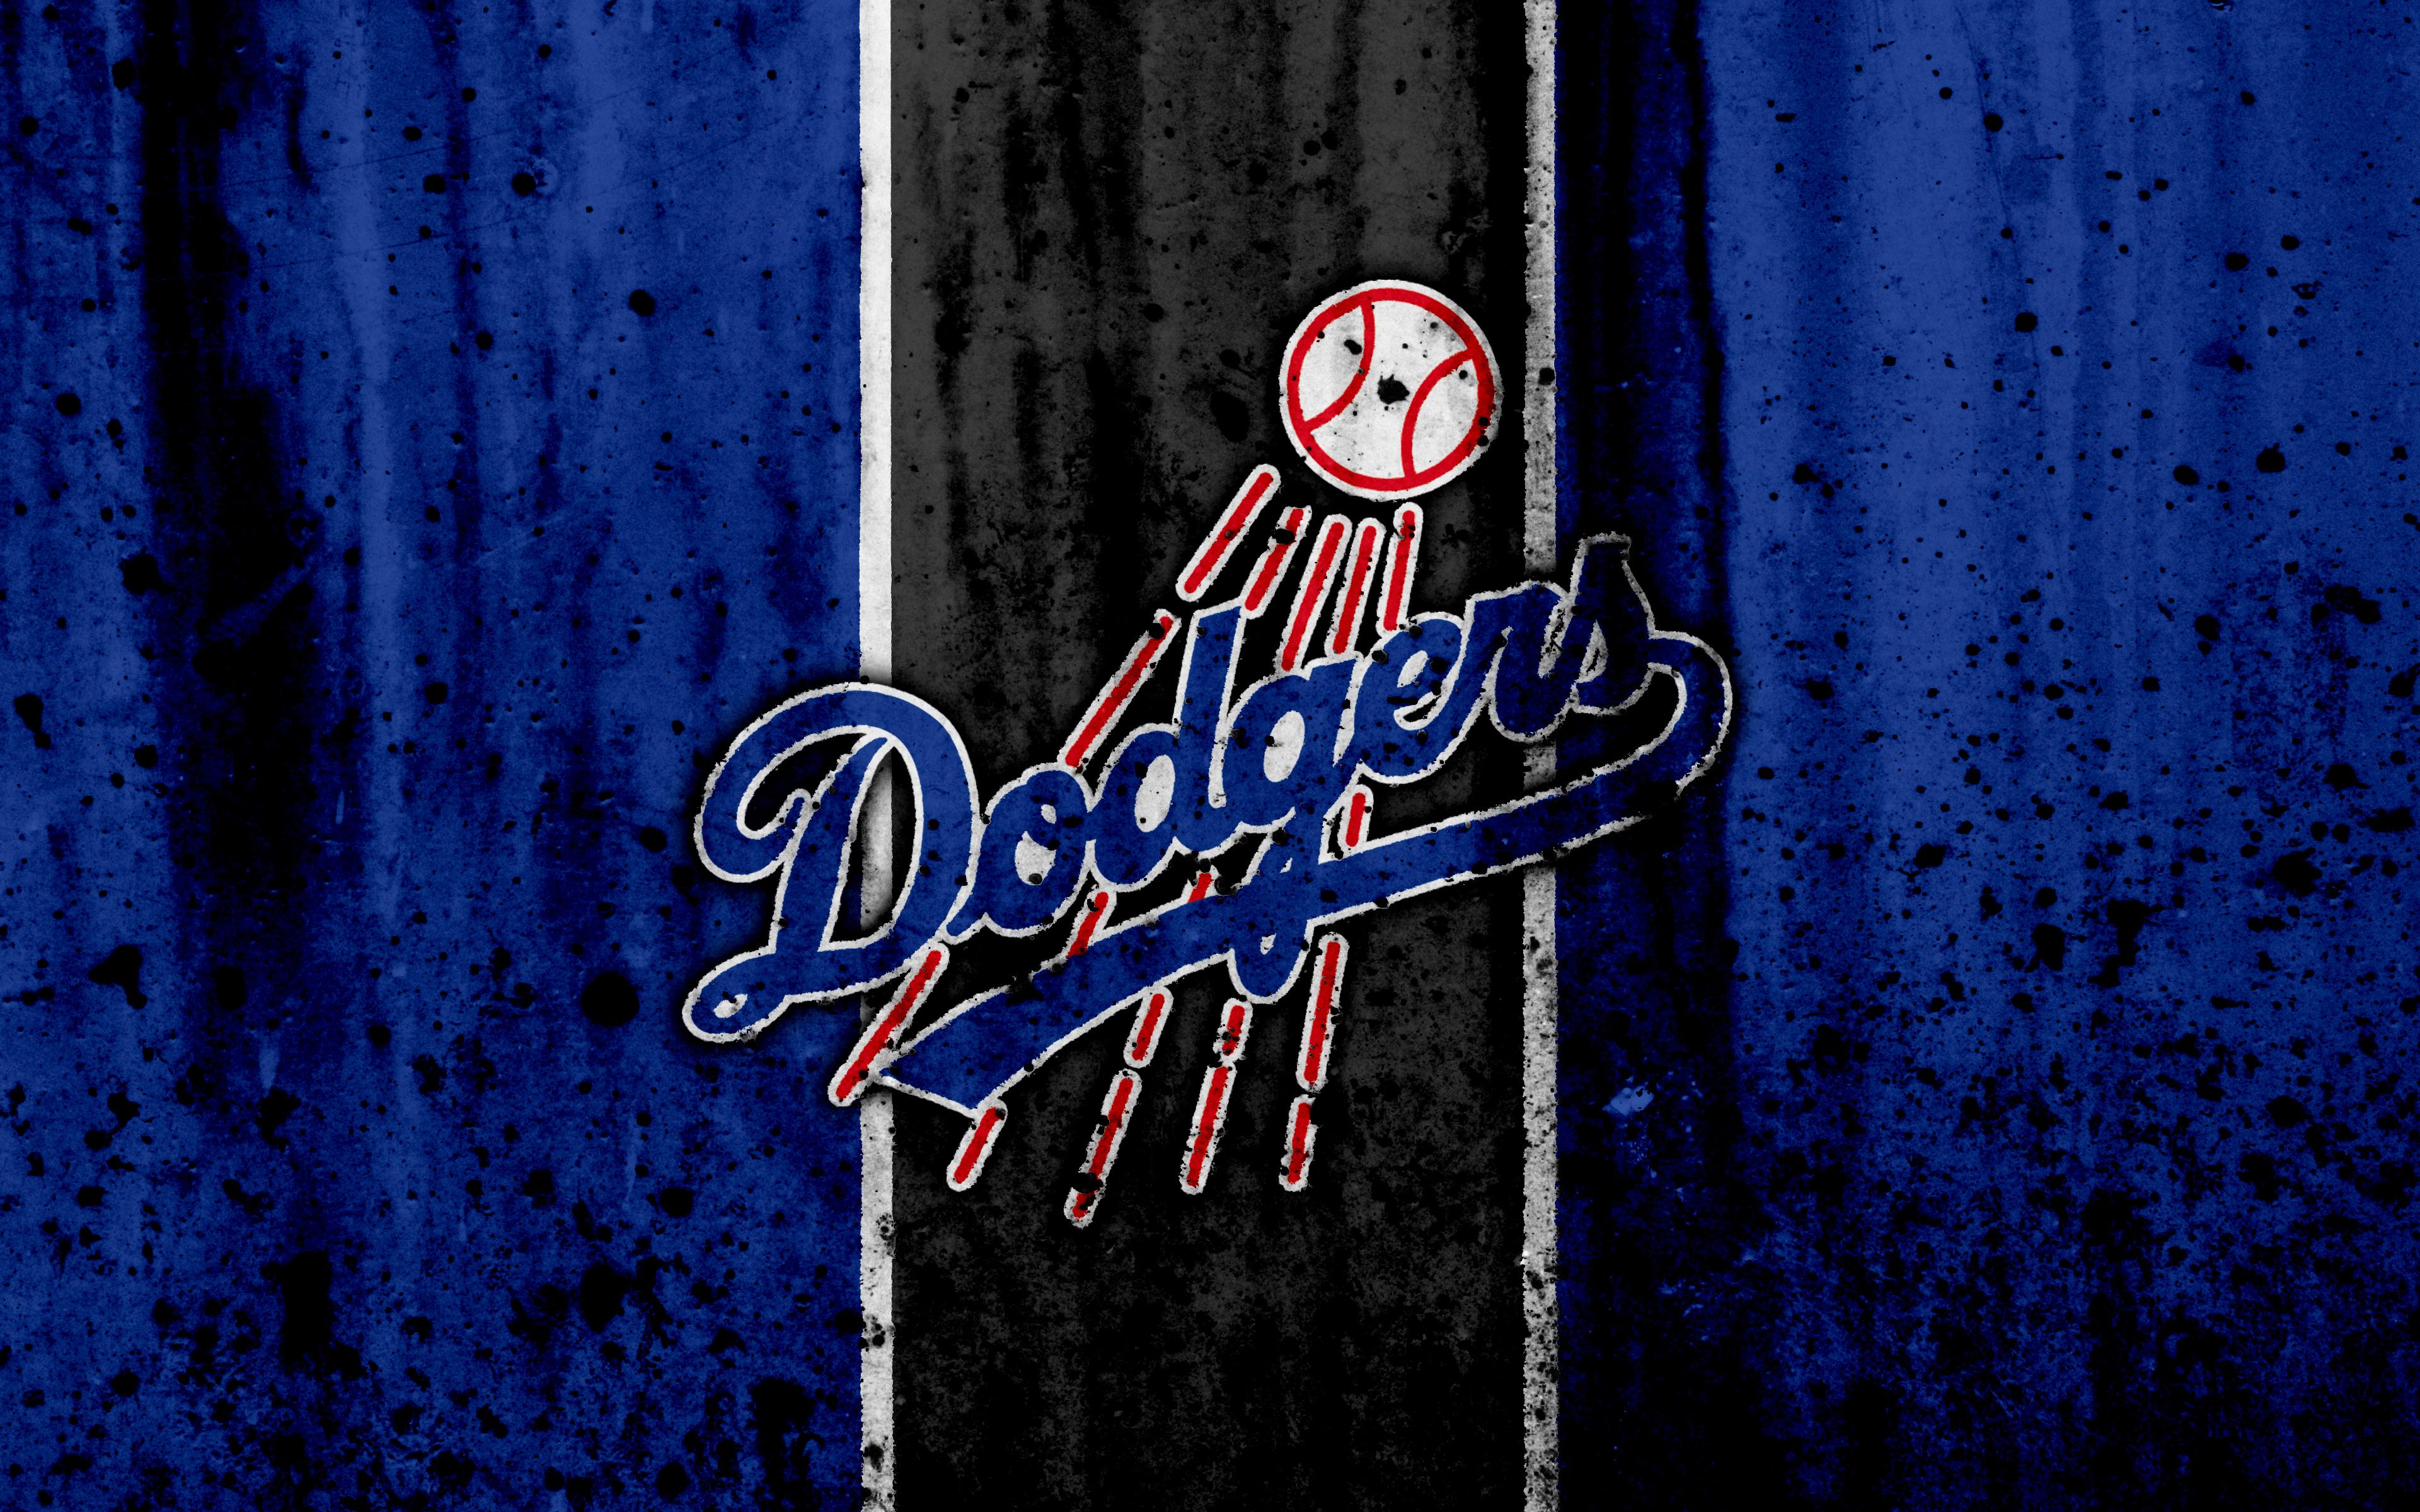 Los Angeles Dodgers 2019 Wallpapers Wallpaper Cave